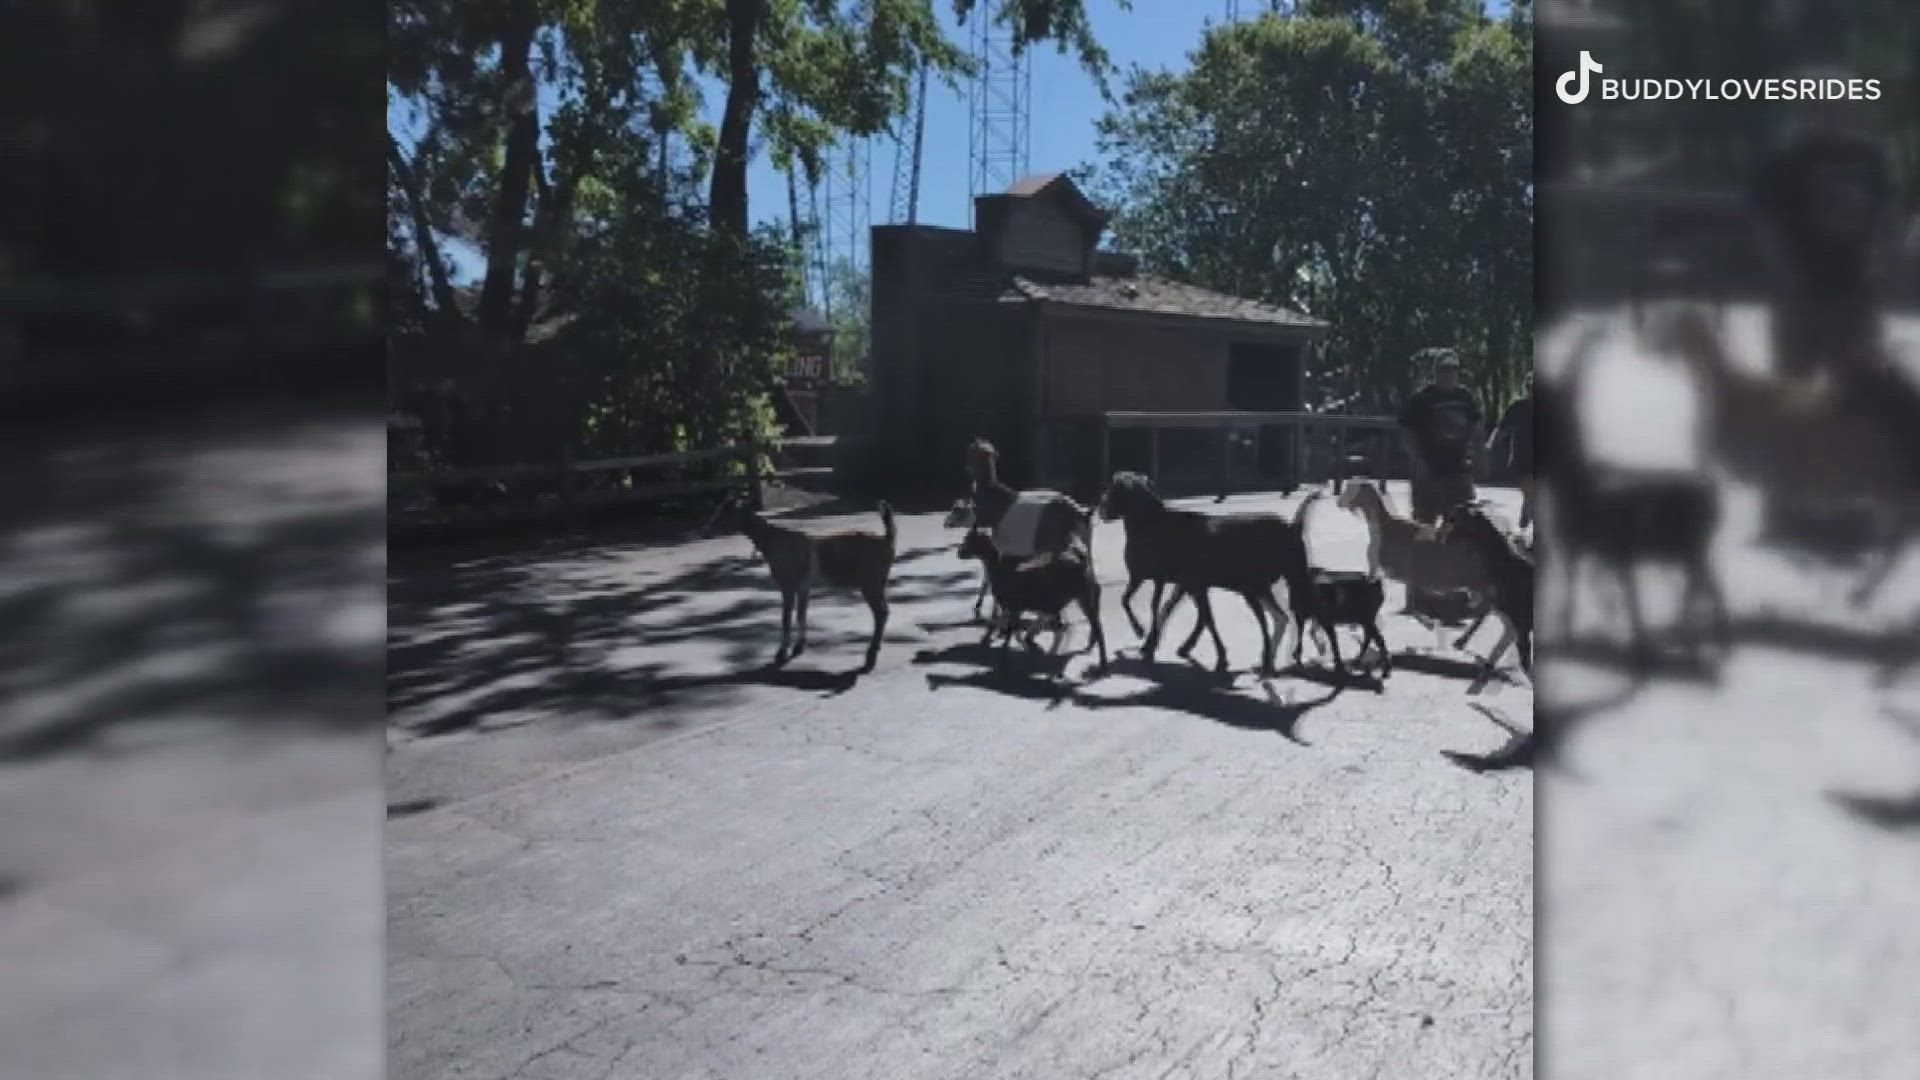 First it was camels, and now it's the goats... For the second time in recent days, animals from The Barnyard petting zoo at Cedar Point have been seen on the loose.